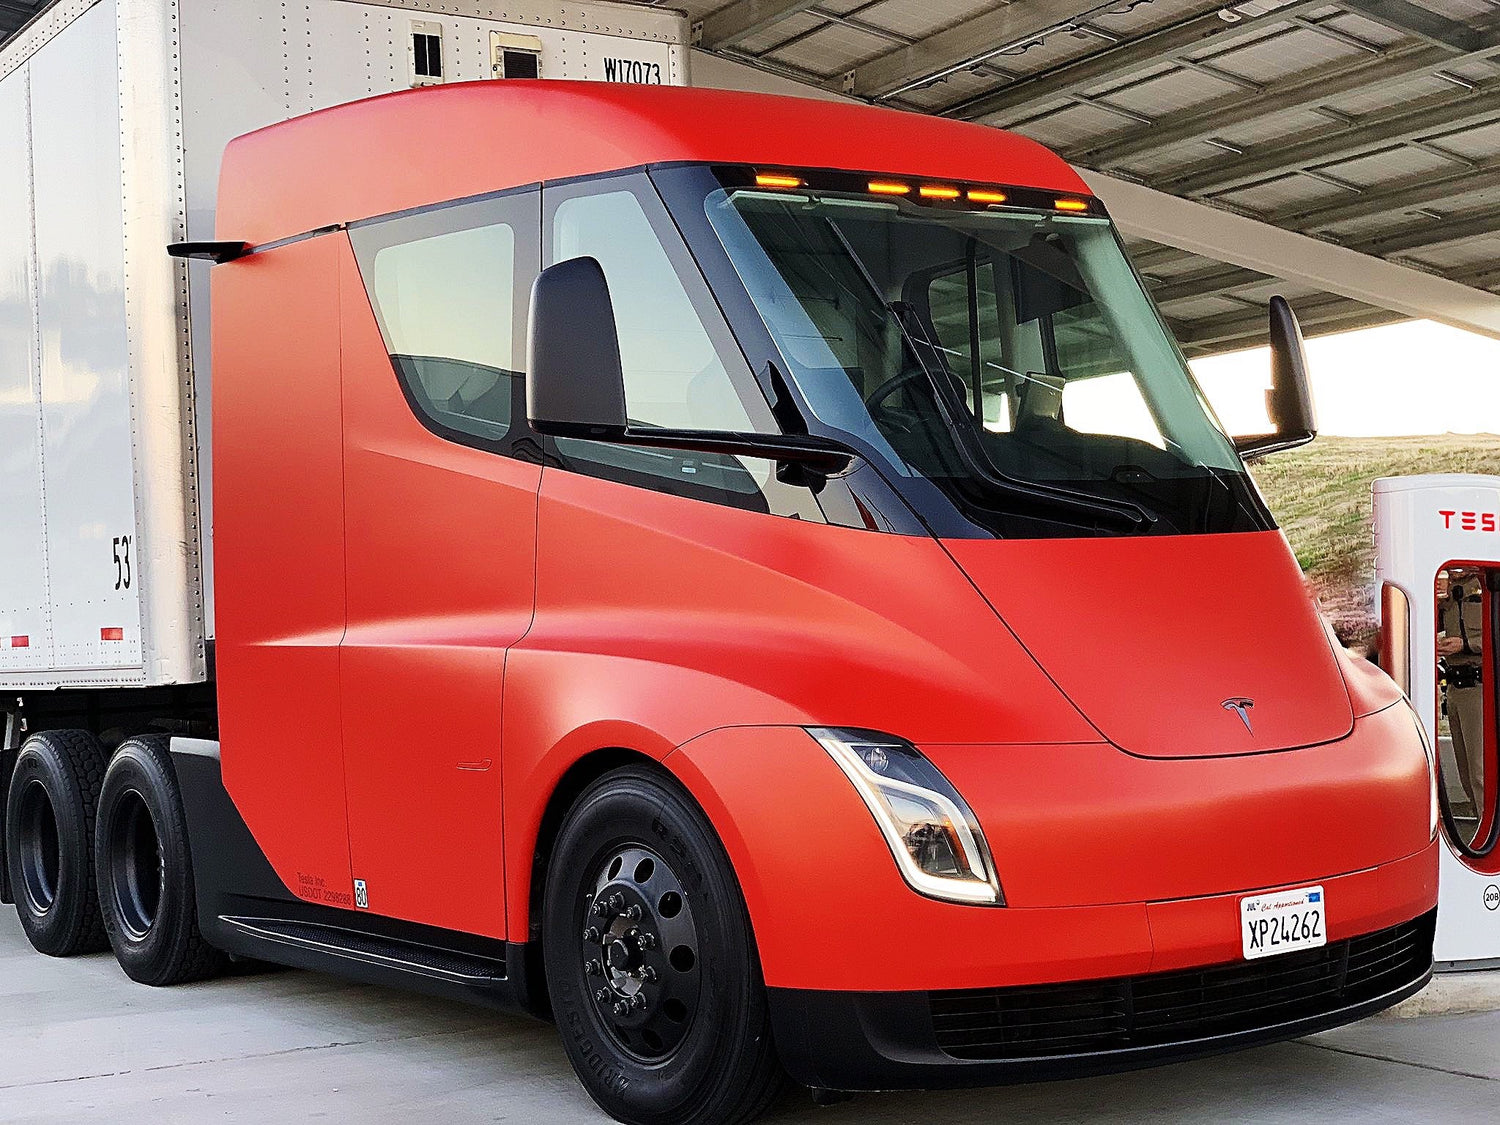 Tesla Filed Patent Related to Semi Truck: 'Liquid Cooled Charging Cable and Connector'